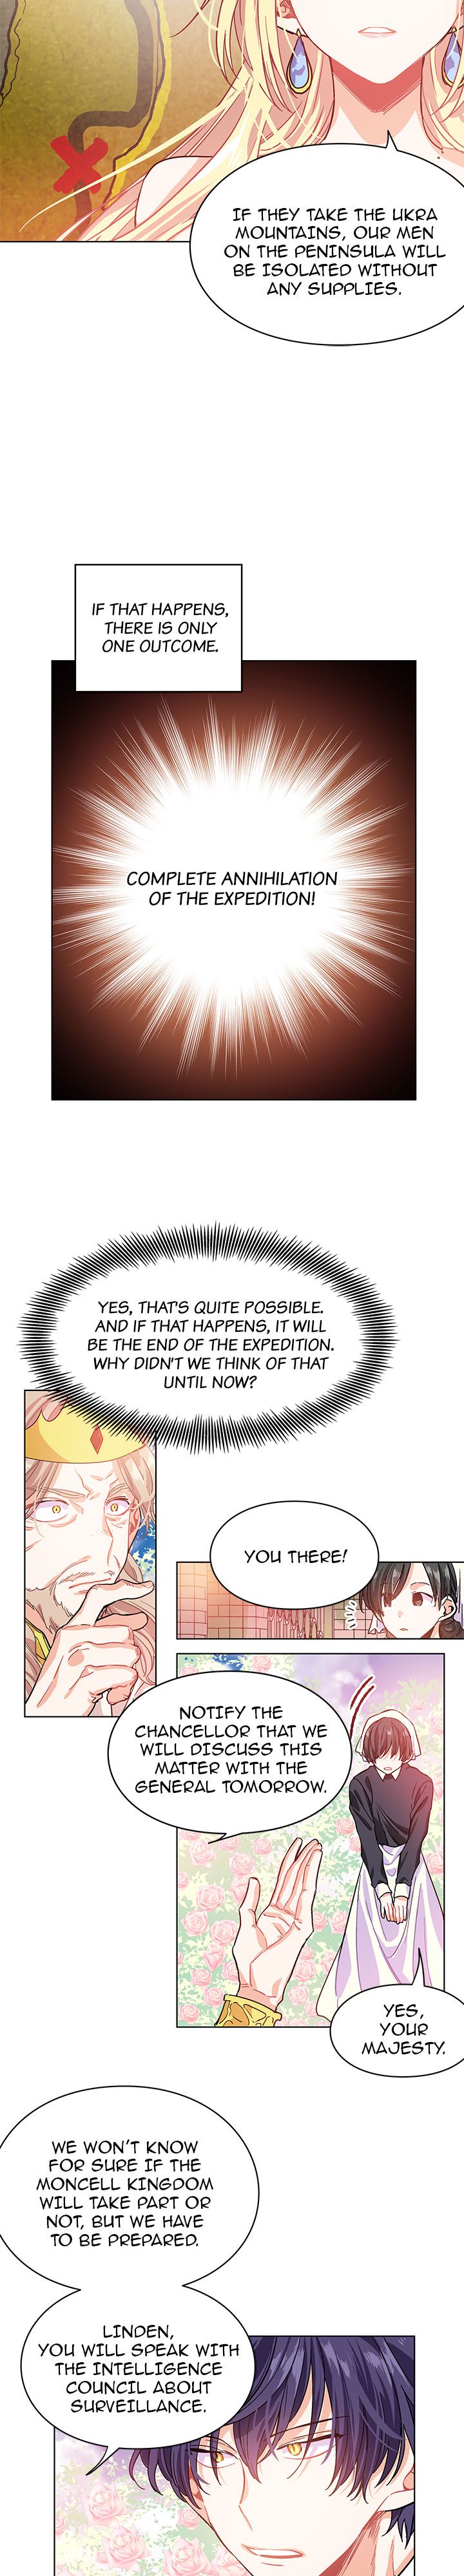 Doctor Elise – The Royal Lady with the Lamp - Chapter 8 Page 4